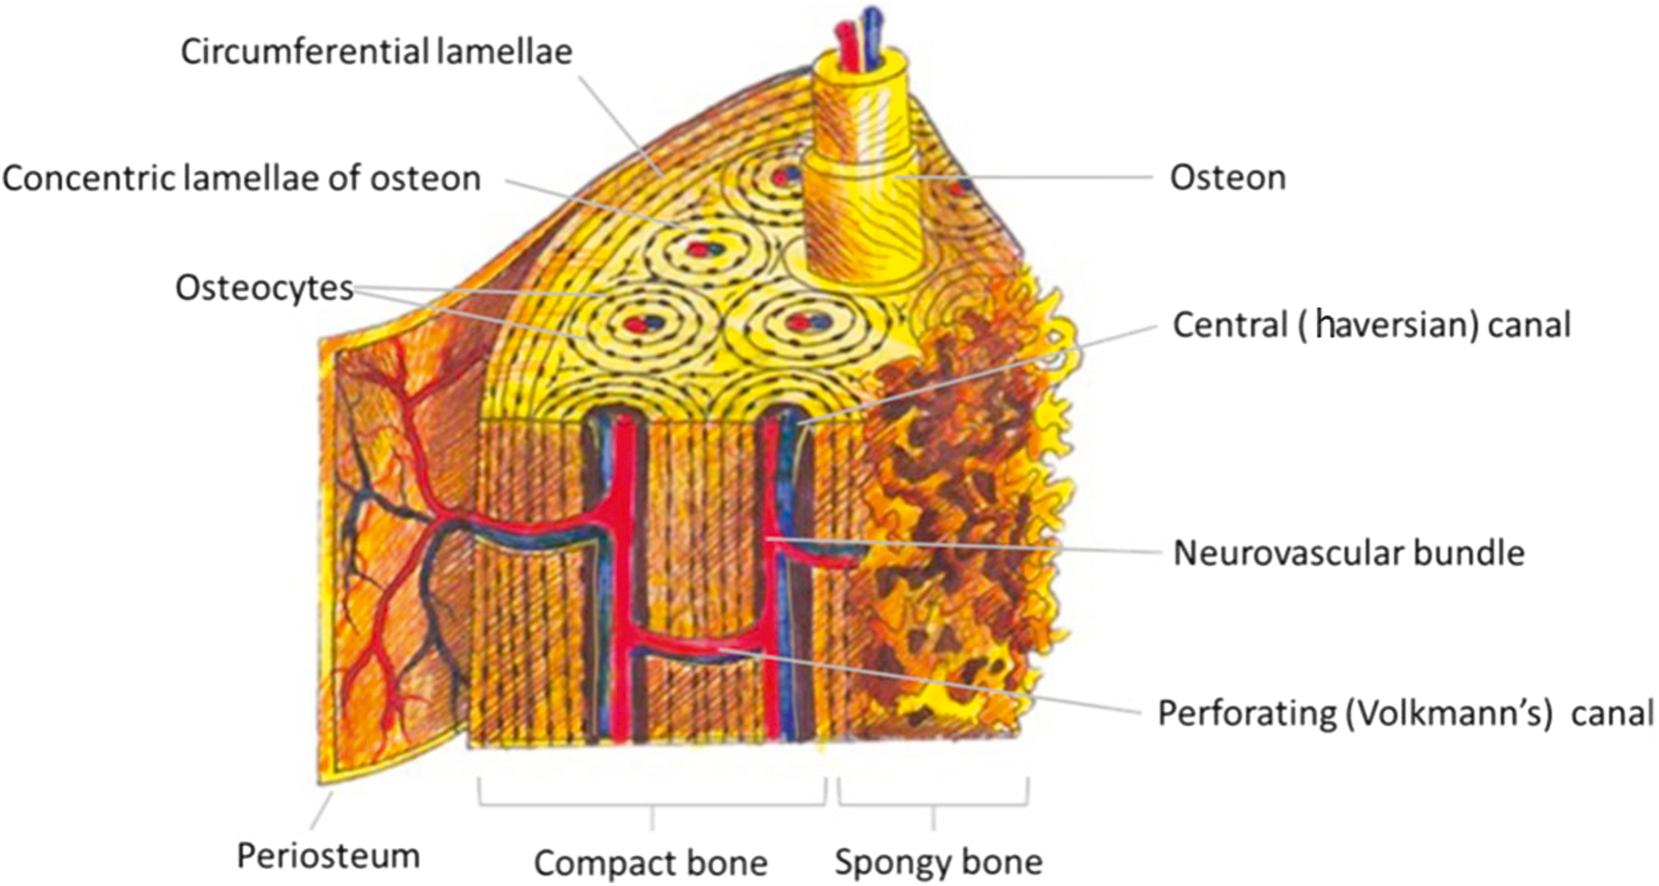 Fig. 1.1, A depiction of the ultrastructural characteristics of bone. For clarity, 2 or 3 concentric lamellae are shown to represent the osteon; normally, the osteon is composed of 5 to 20 concentric lamellae. (Drawing by Alexandru Margarit and labeling by Alan Rosenberg. Printed with permission. All rights reserved.)